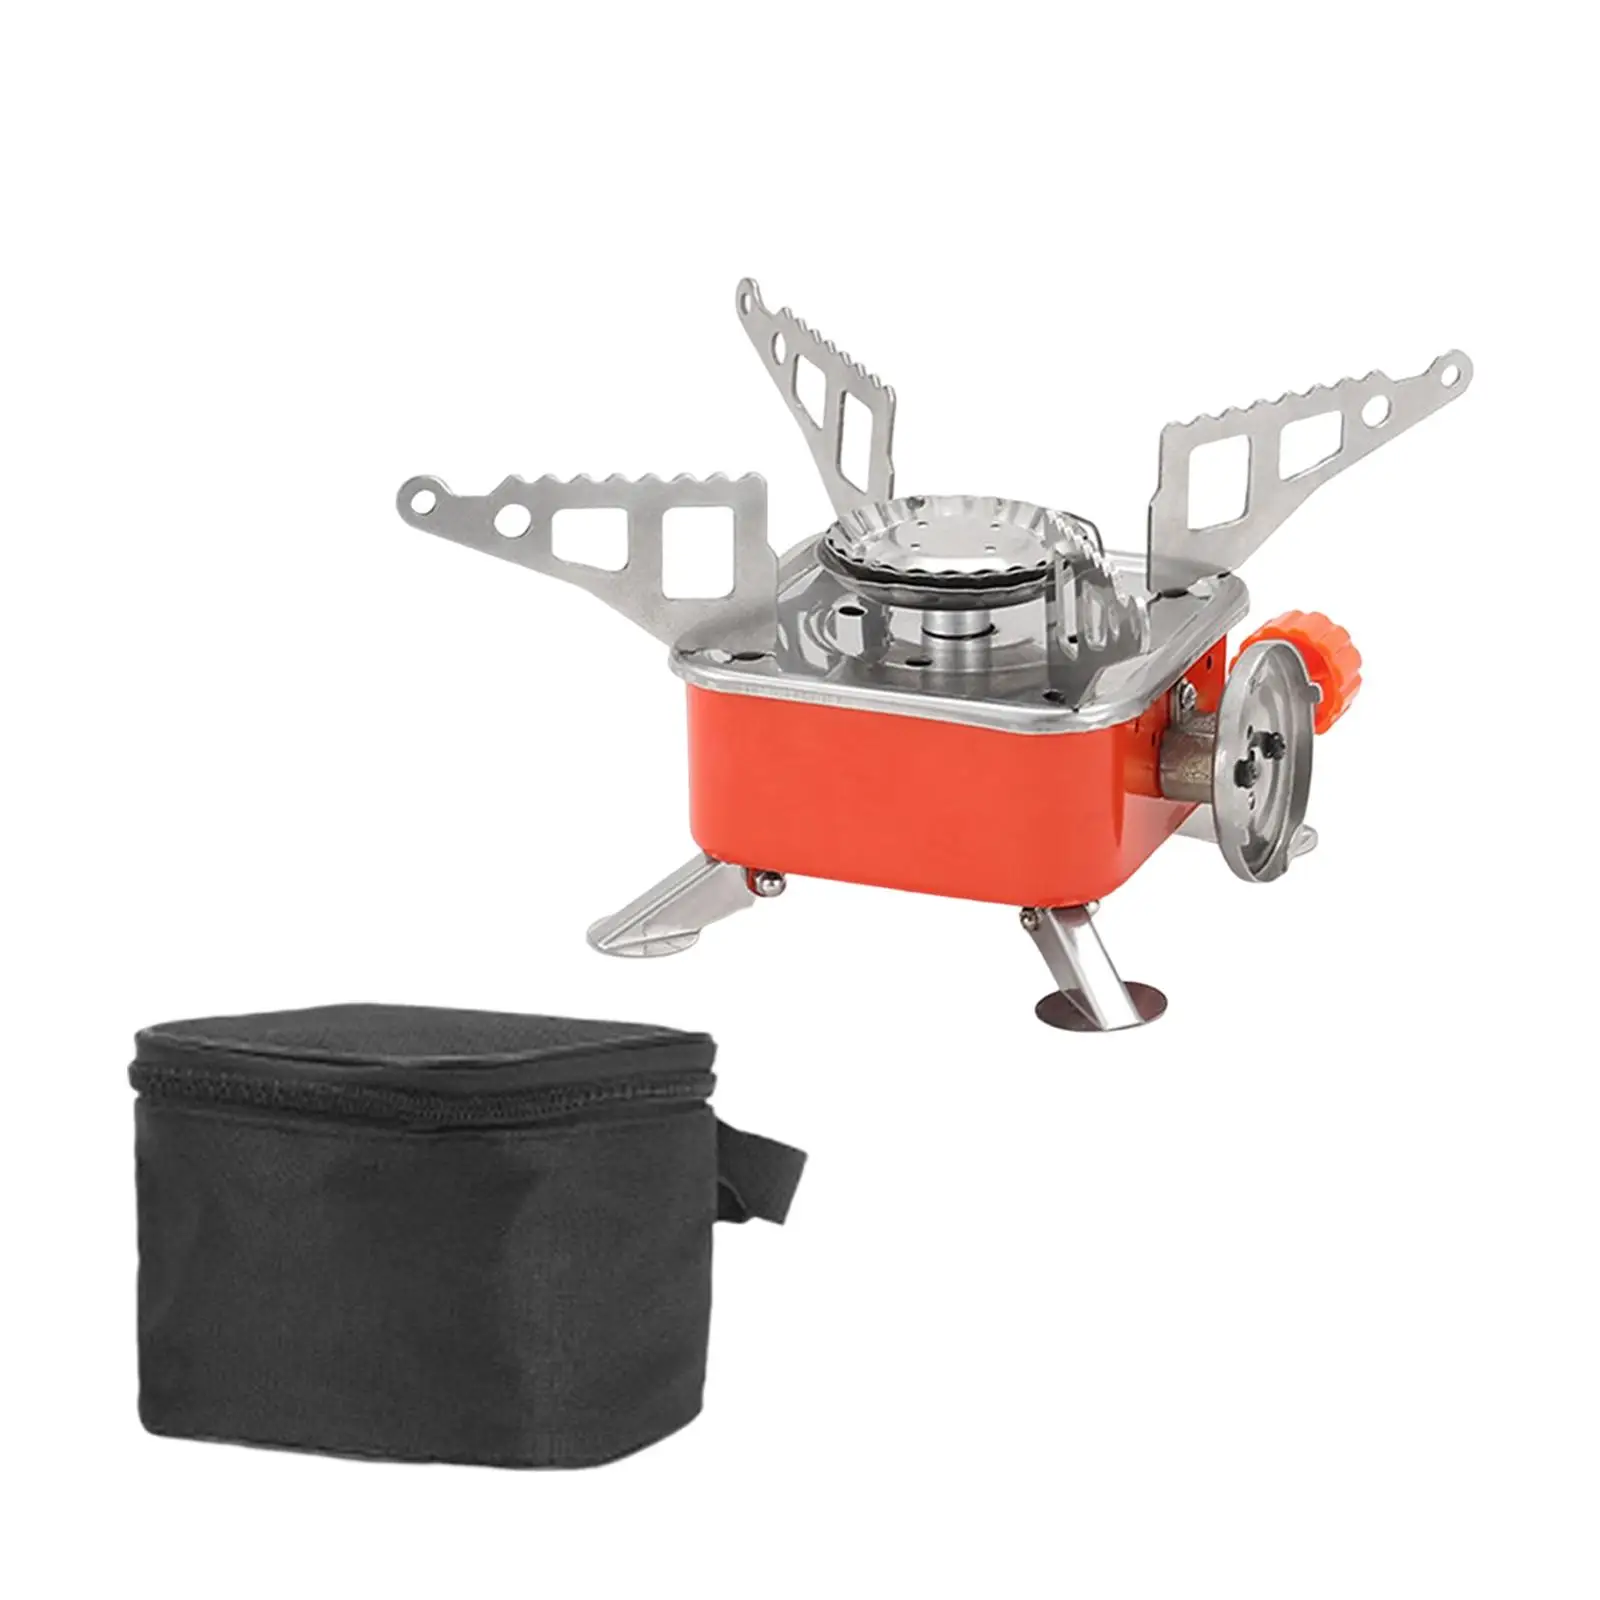 Portable Camping Gas Stove with Piezo Ignition Folding Ultralight Stove Stove Burner Cooker Gear for Hiking Fishing Picnic